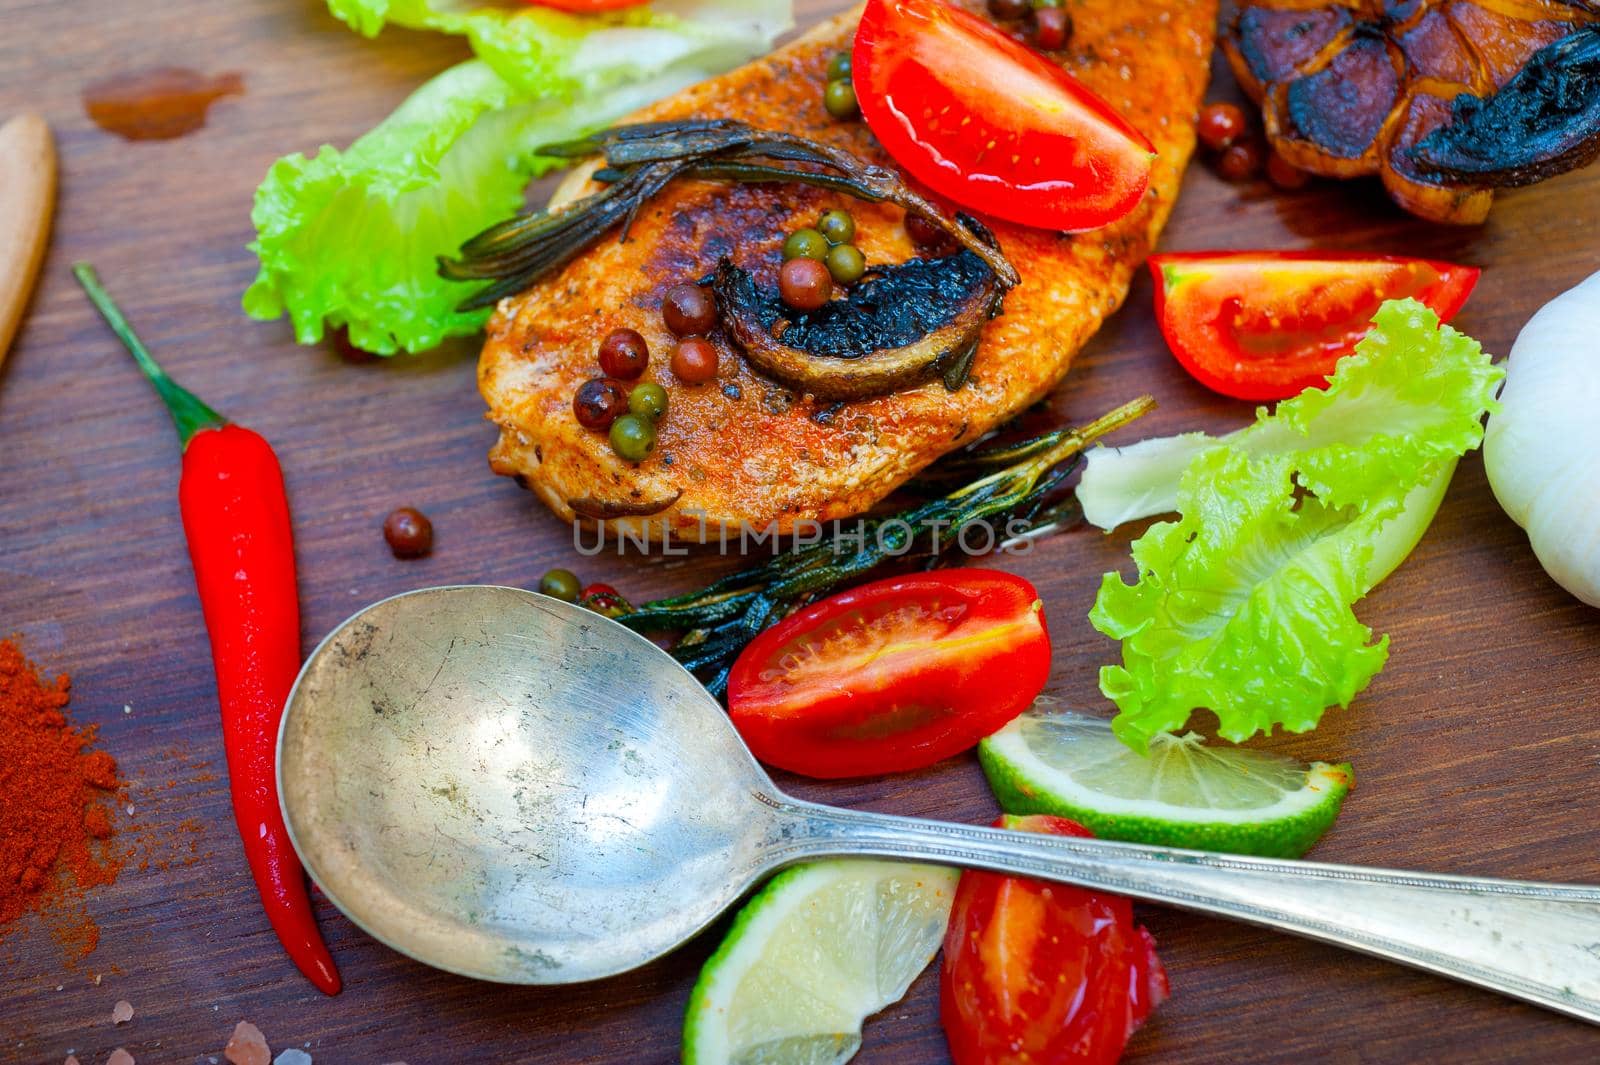 wood fired hoven cooked chicken breast on wood board  by keko64